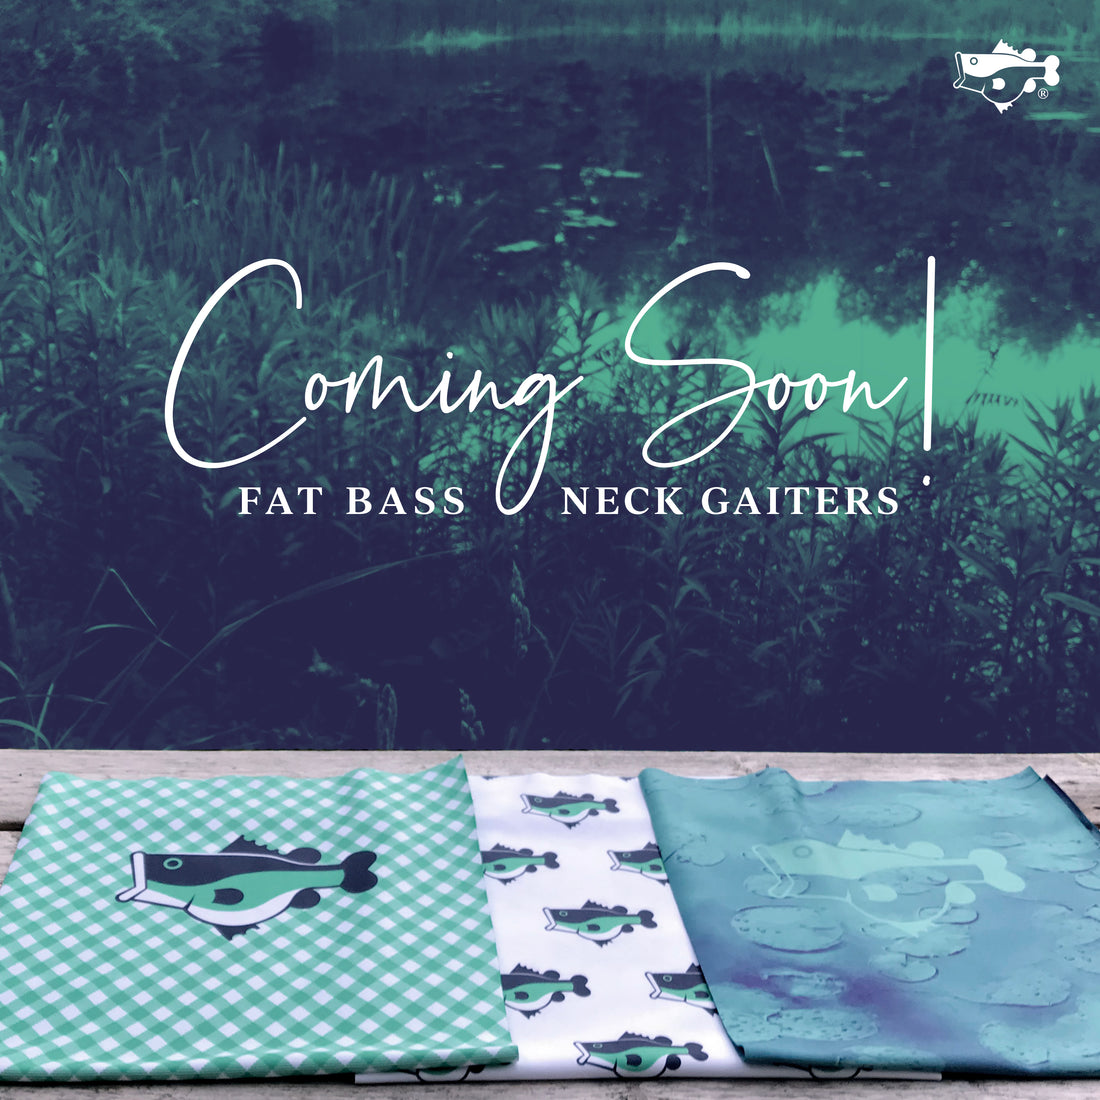 New Fat Bass Neck Gaiters coming in this week!